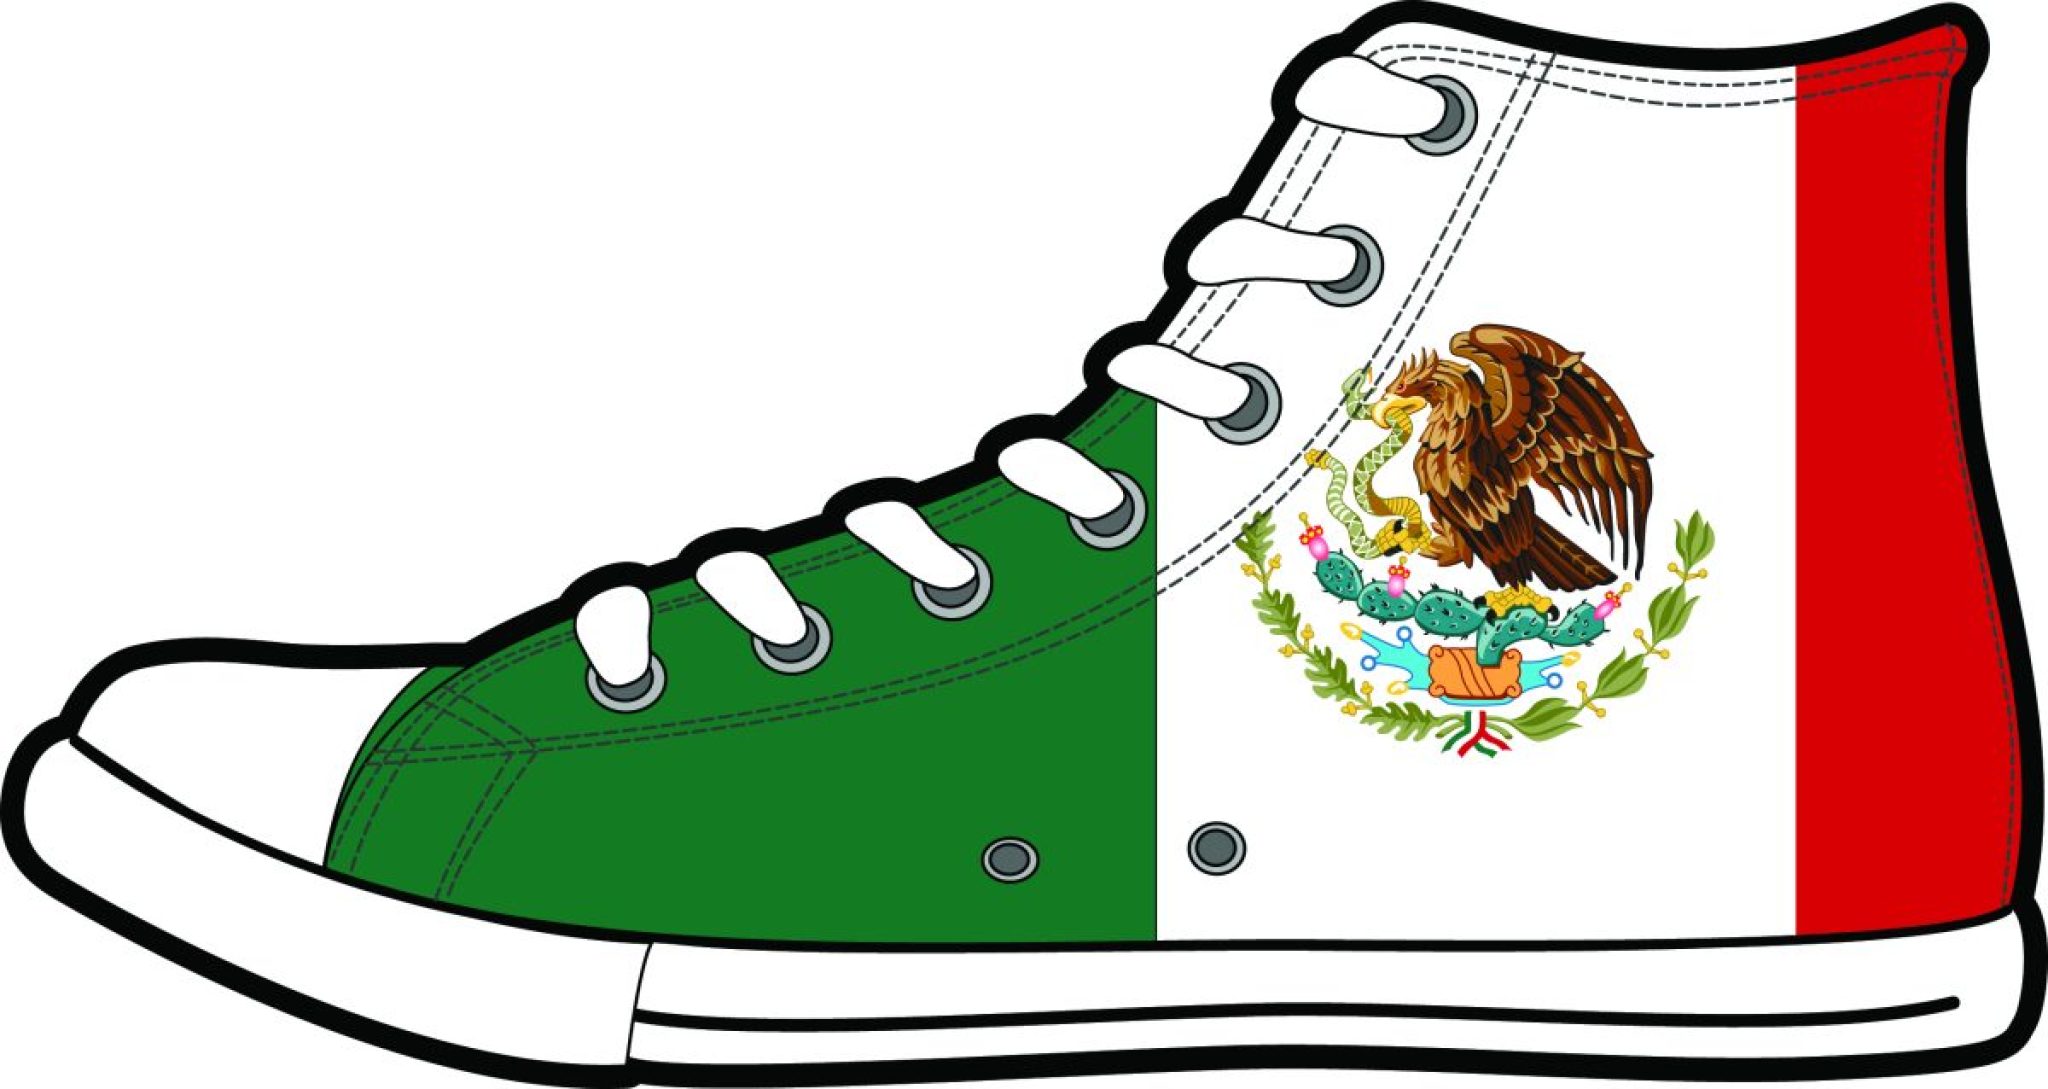 Mexico Shoe Size Chart How To Convert Mexican Shoe Size? The Shoe